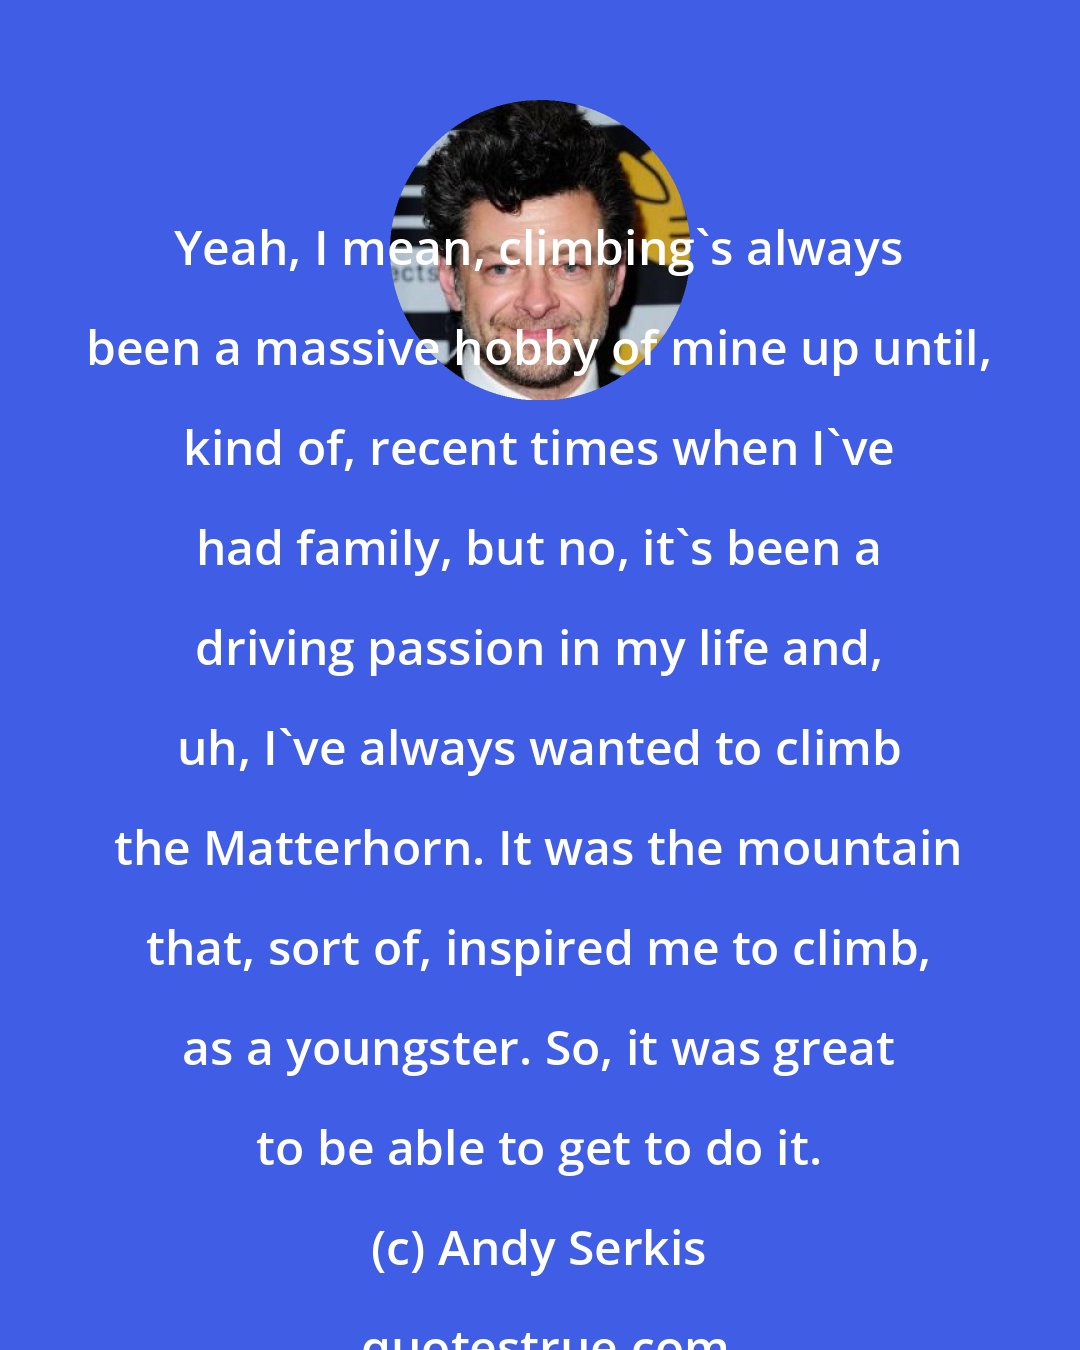 Andy Serkis: Yeah, I mean, climbing's always been a massive hobby of mine up until, kind of, recent times when I've had family, but no, it's been a driving passion in my life and, uh, I've always wanted to climb the Matterhorn. It was the mountain that, sort of, inspired me to climb, as a youngster. So, it was great to be able to get to do it.